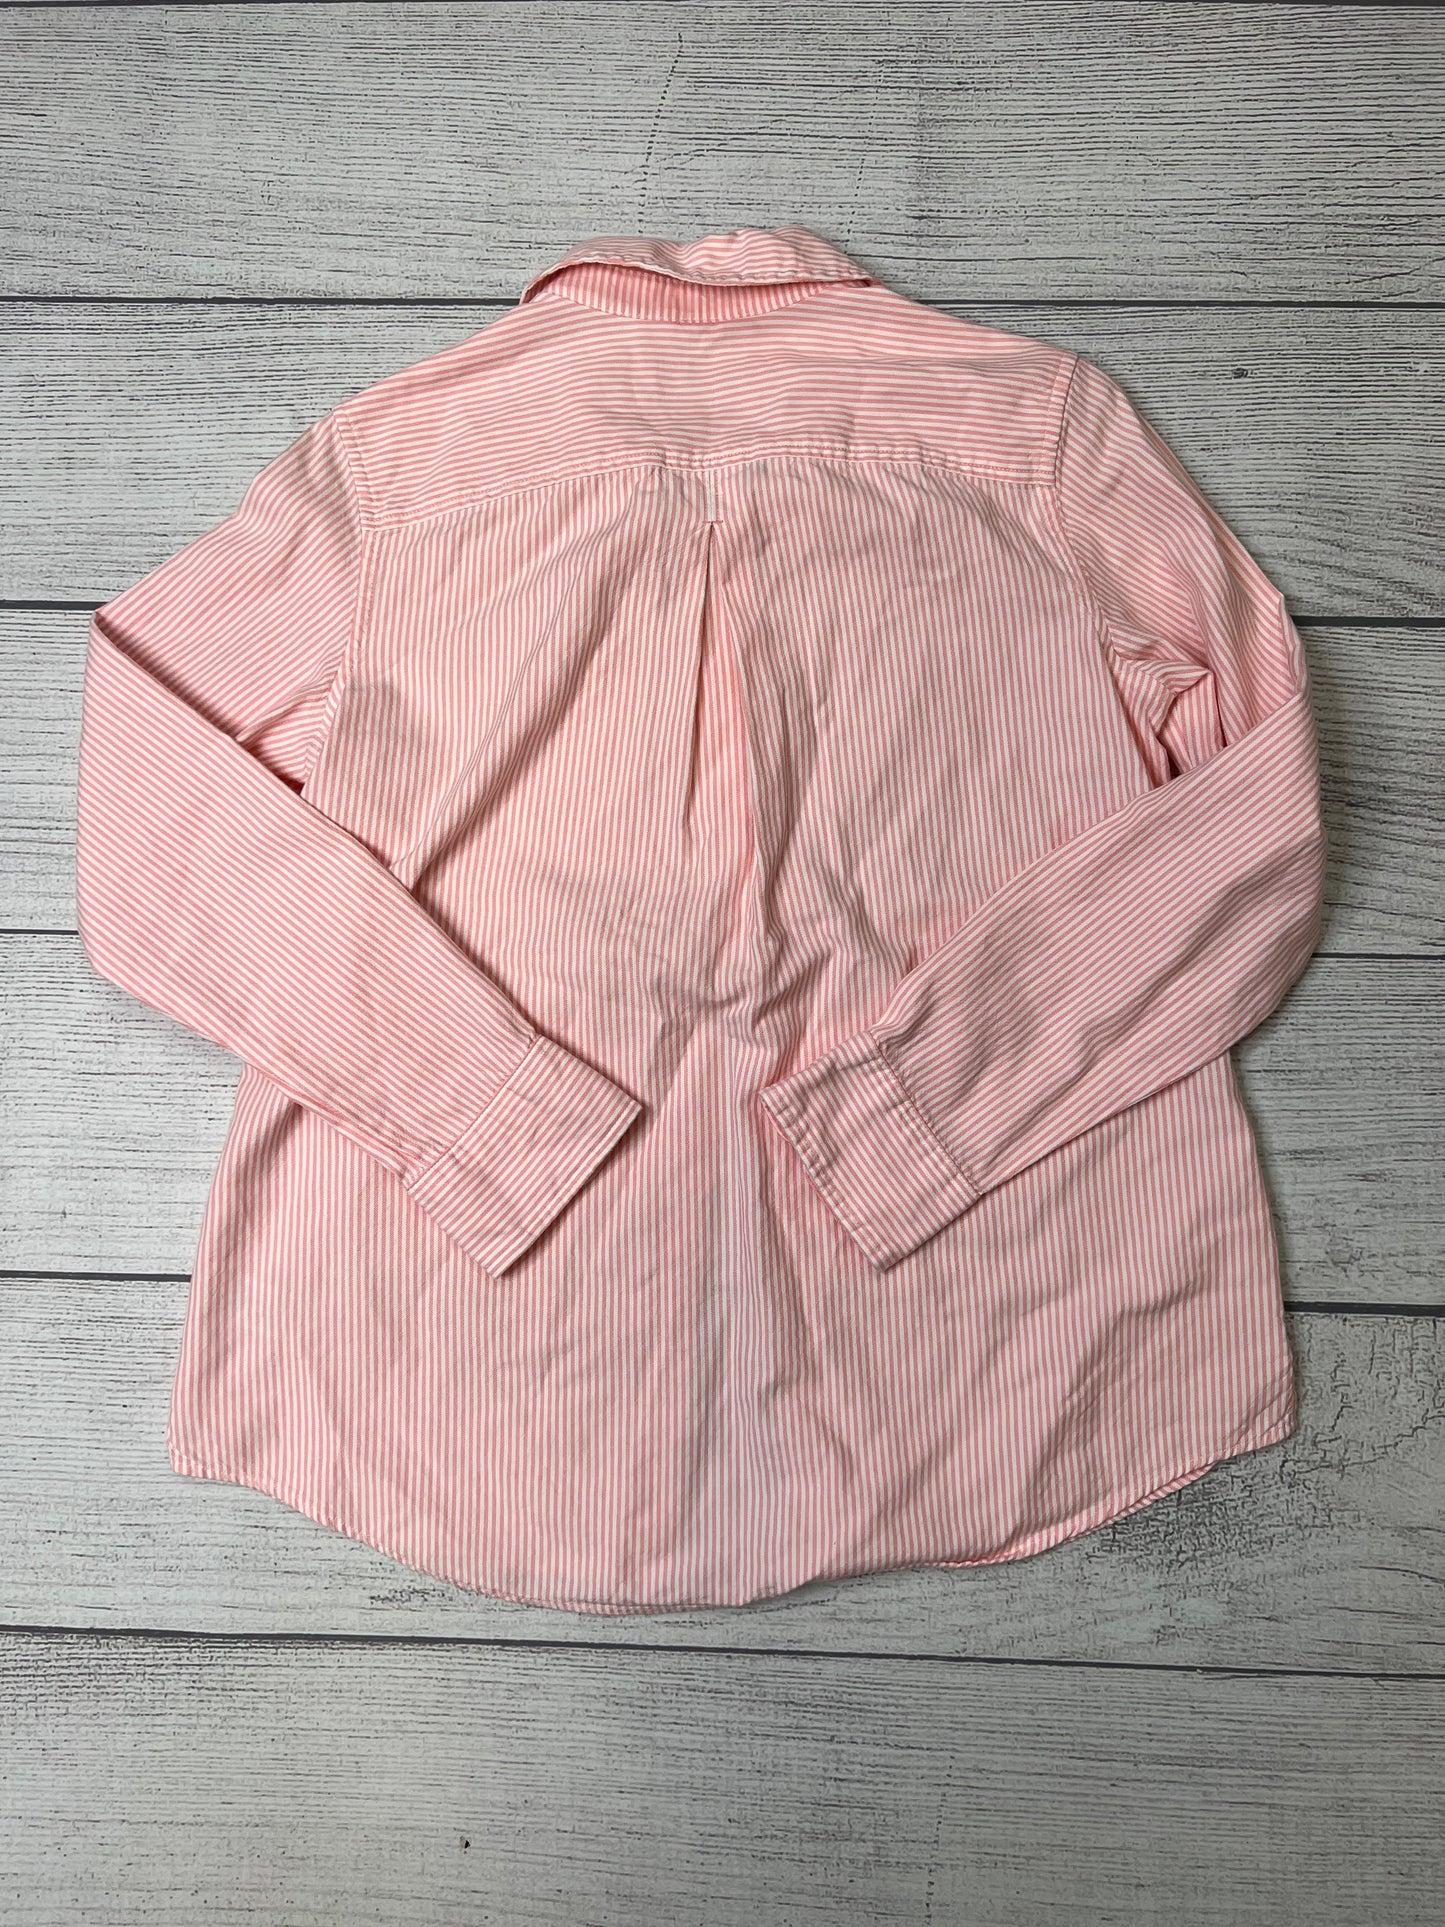 Blouse Long Sleeve By Vineyard Vines  Size: Xs